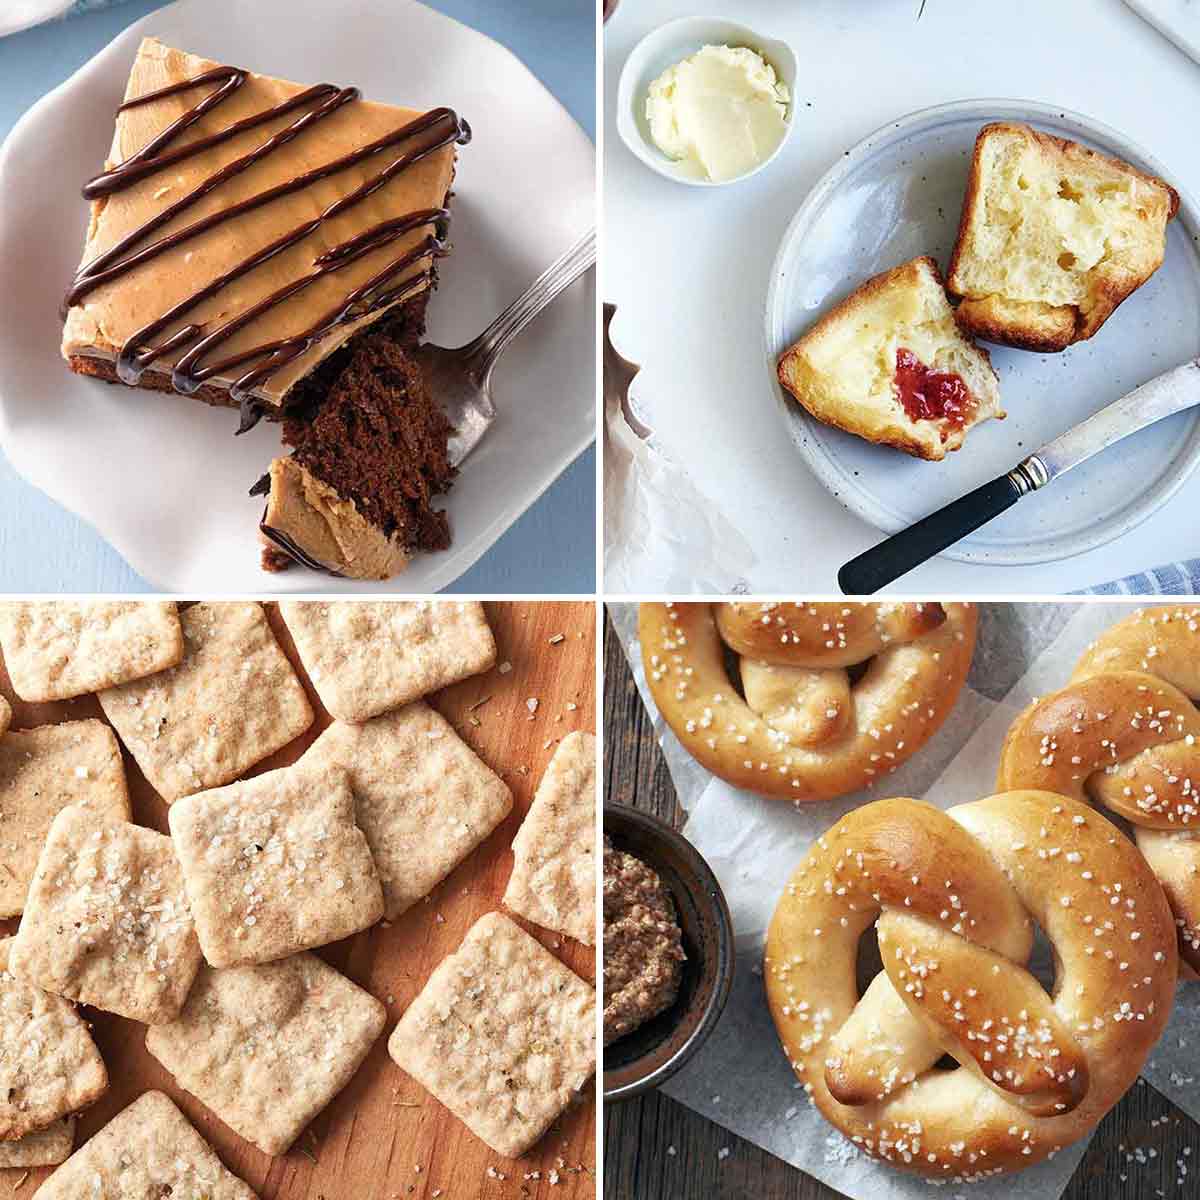 Four images of foods that are made with leftover sourdough starter: crackers, pretzels, cake, toast